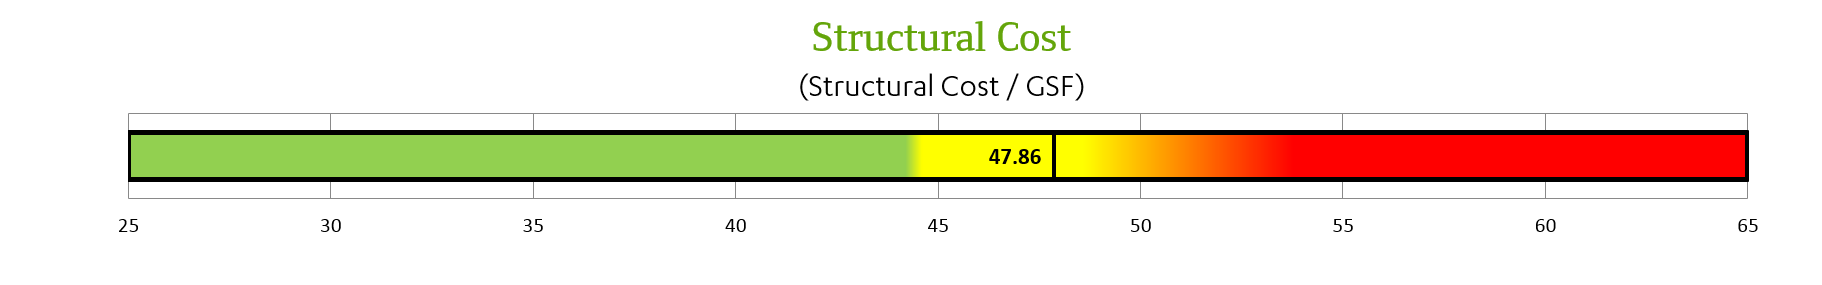 Structural cost analysis